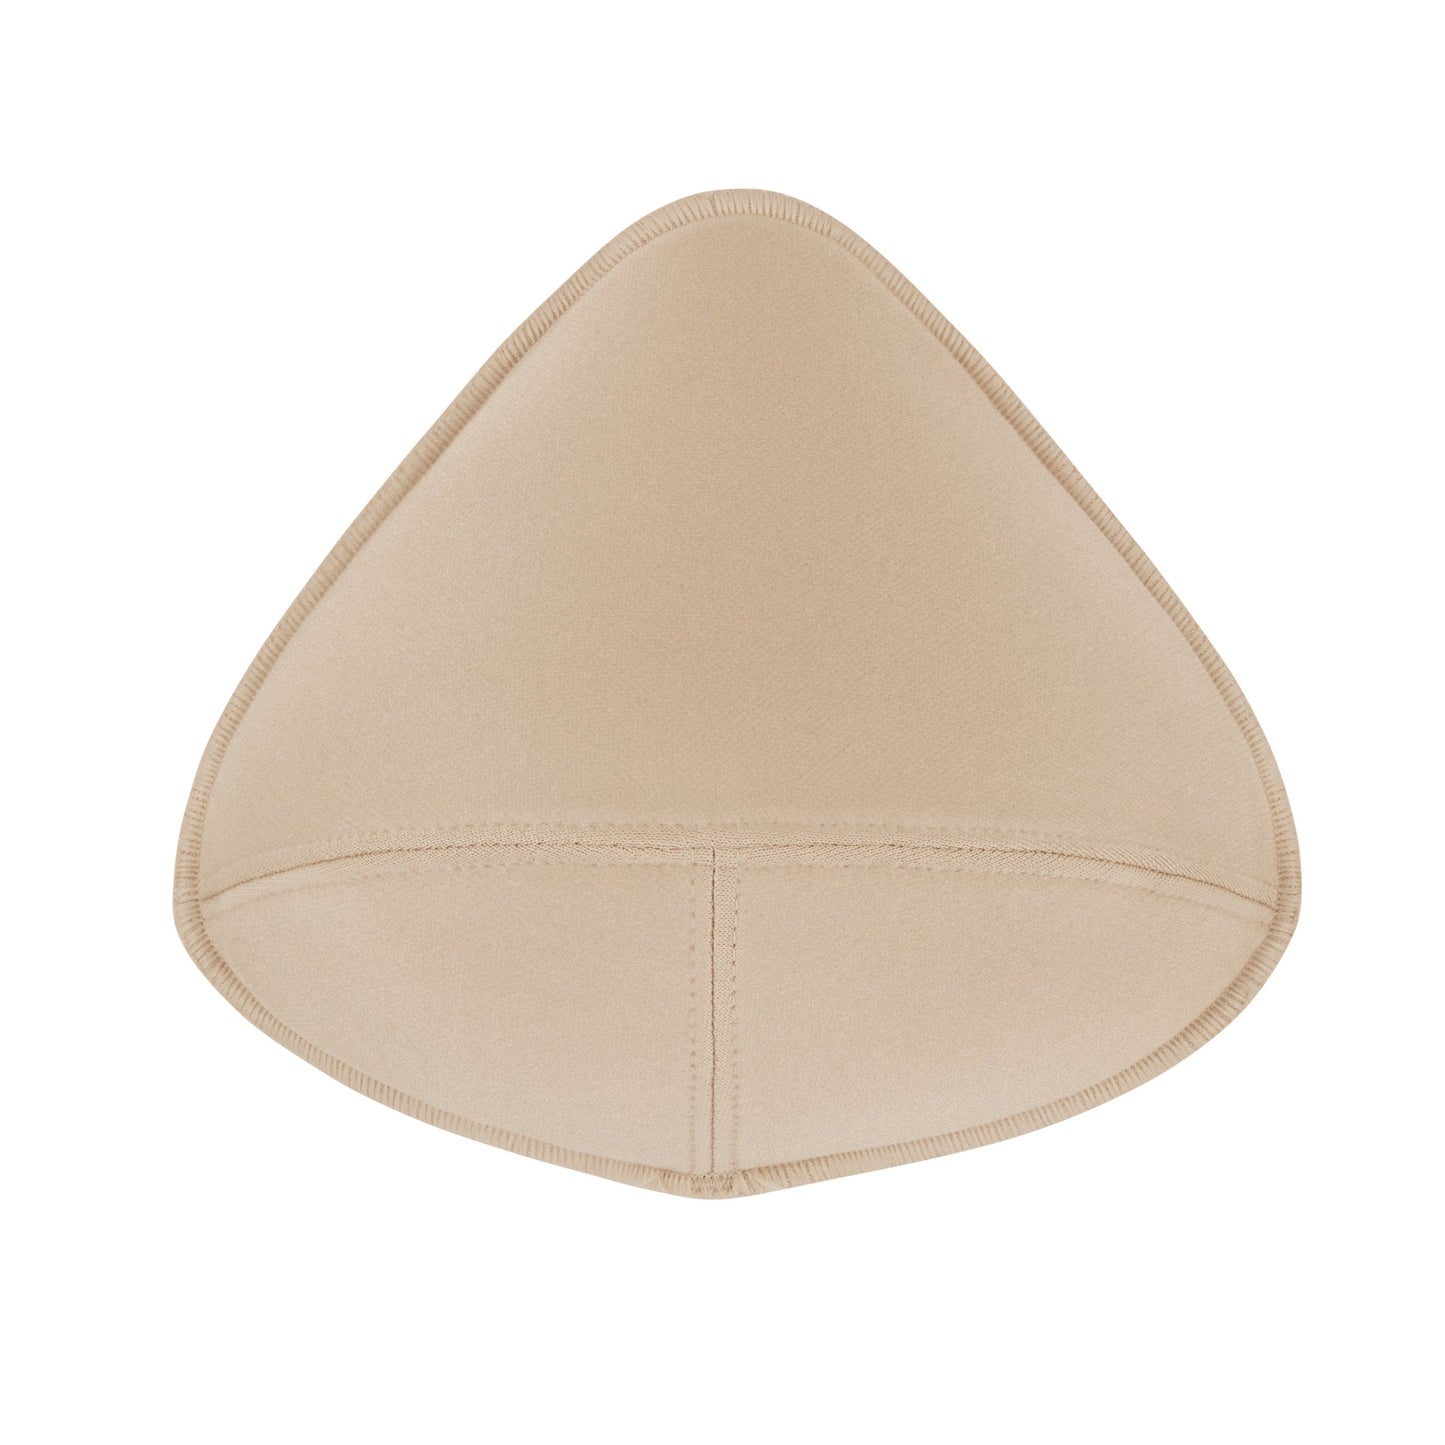 Standard Priform Breast Form in Ivory | Breast Form / Prosthesis by Amoena